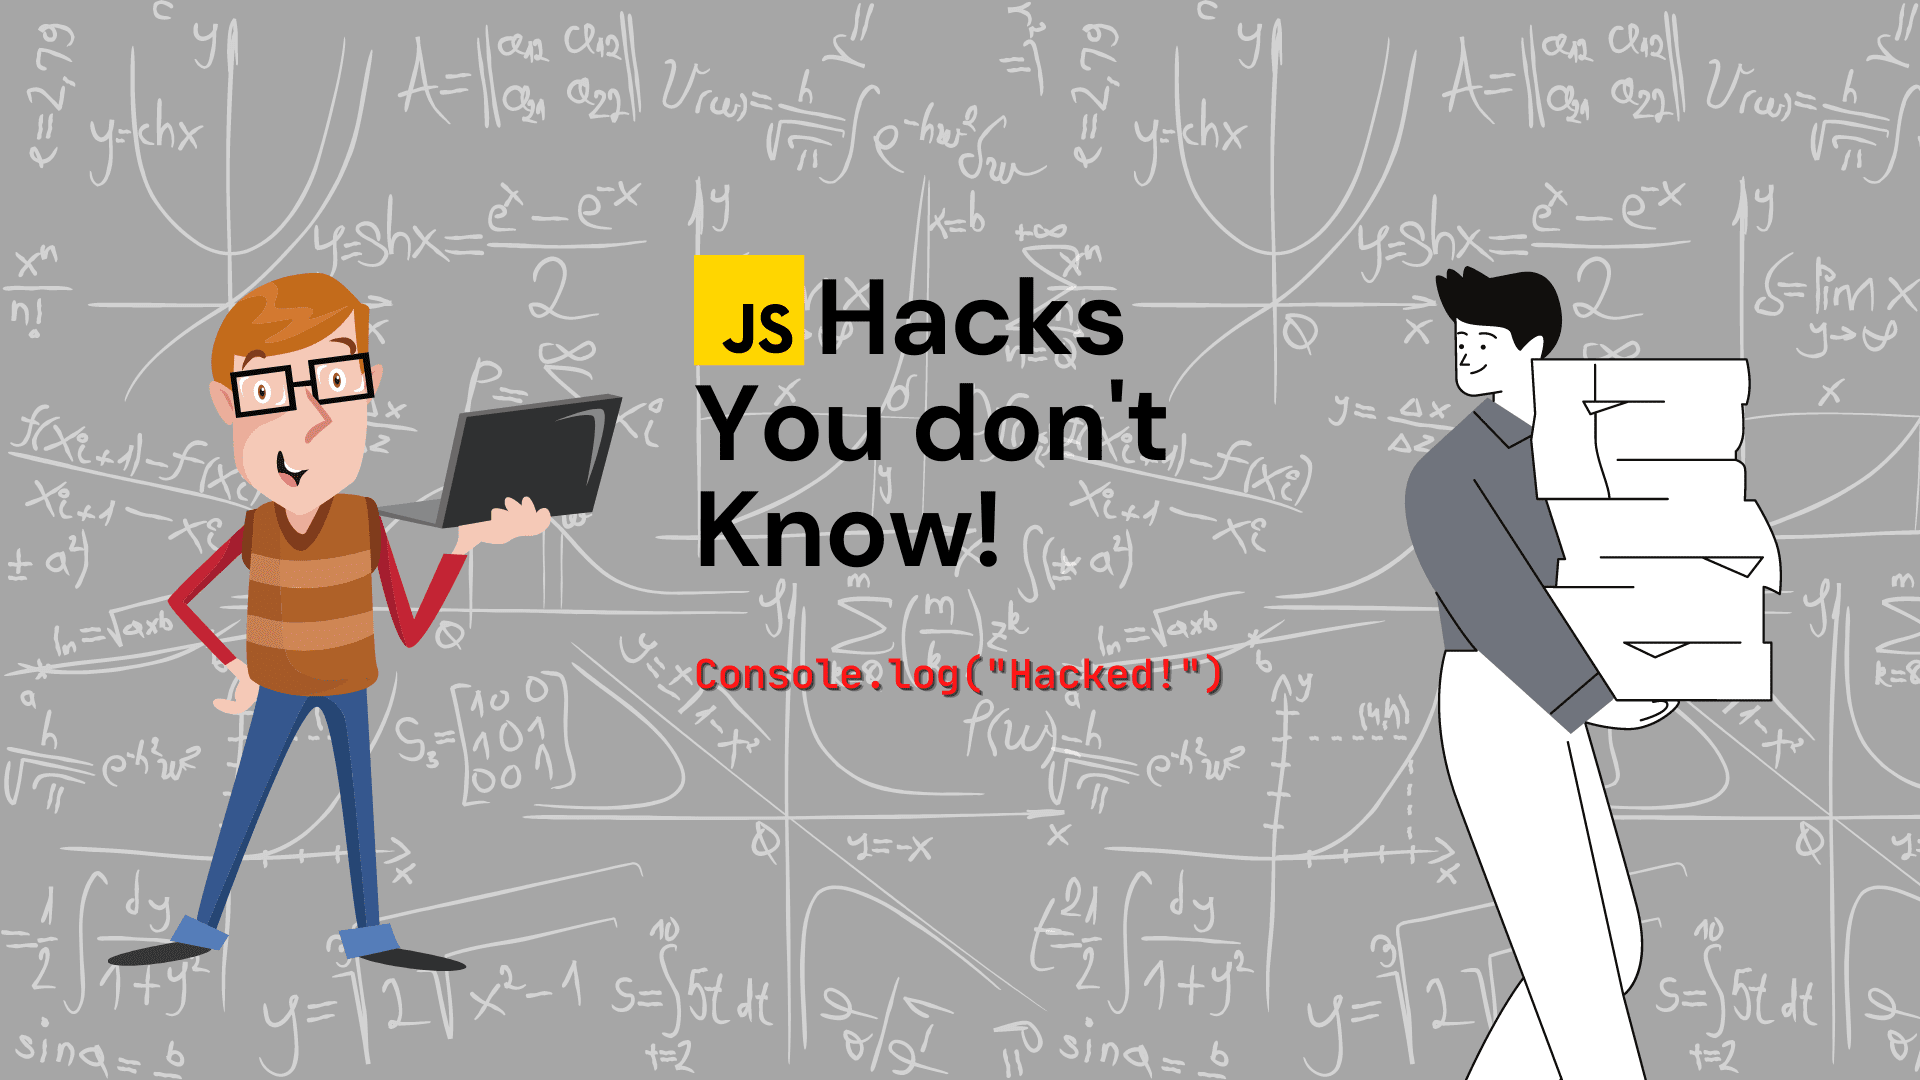 JavaScript Hacks You don't know